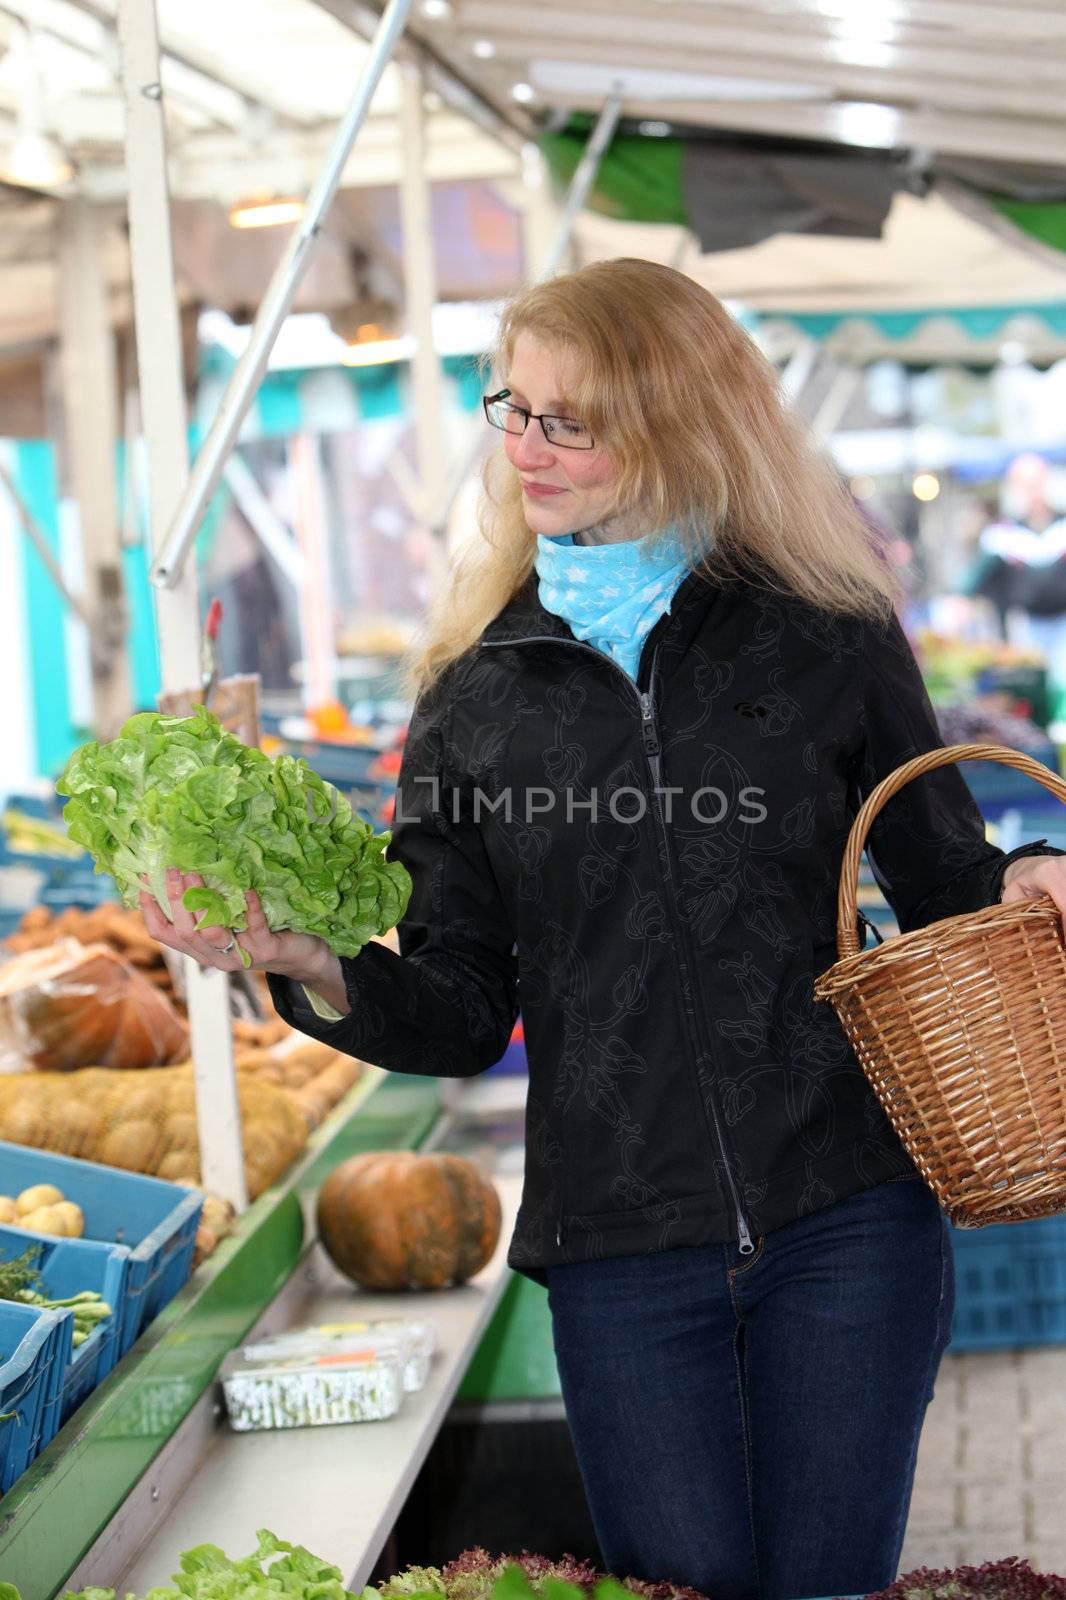 Young woman at a market looking at a head of lettuce and carries a basket
